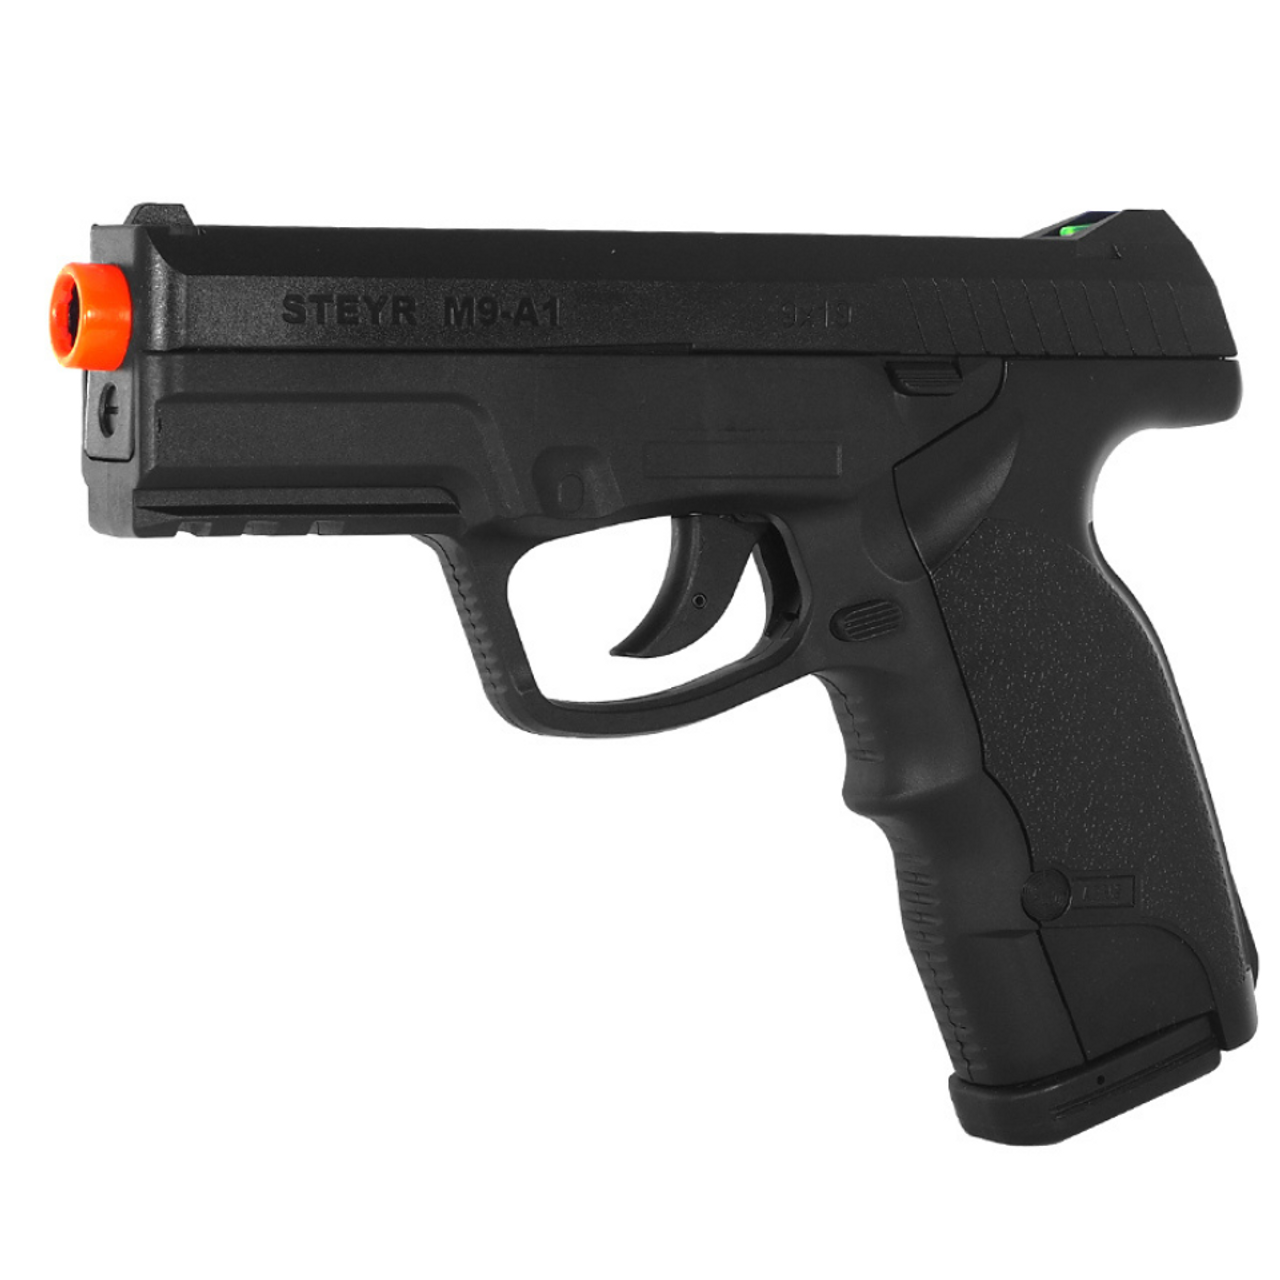 Gas & CO2 Airsoft Pistols, Buy Airsoft Guns Online